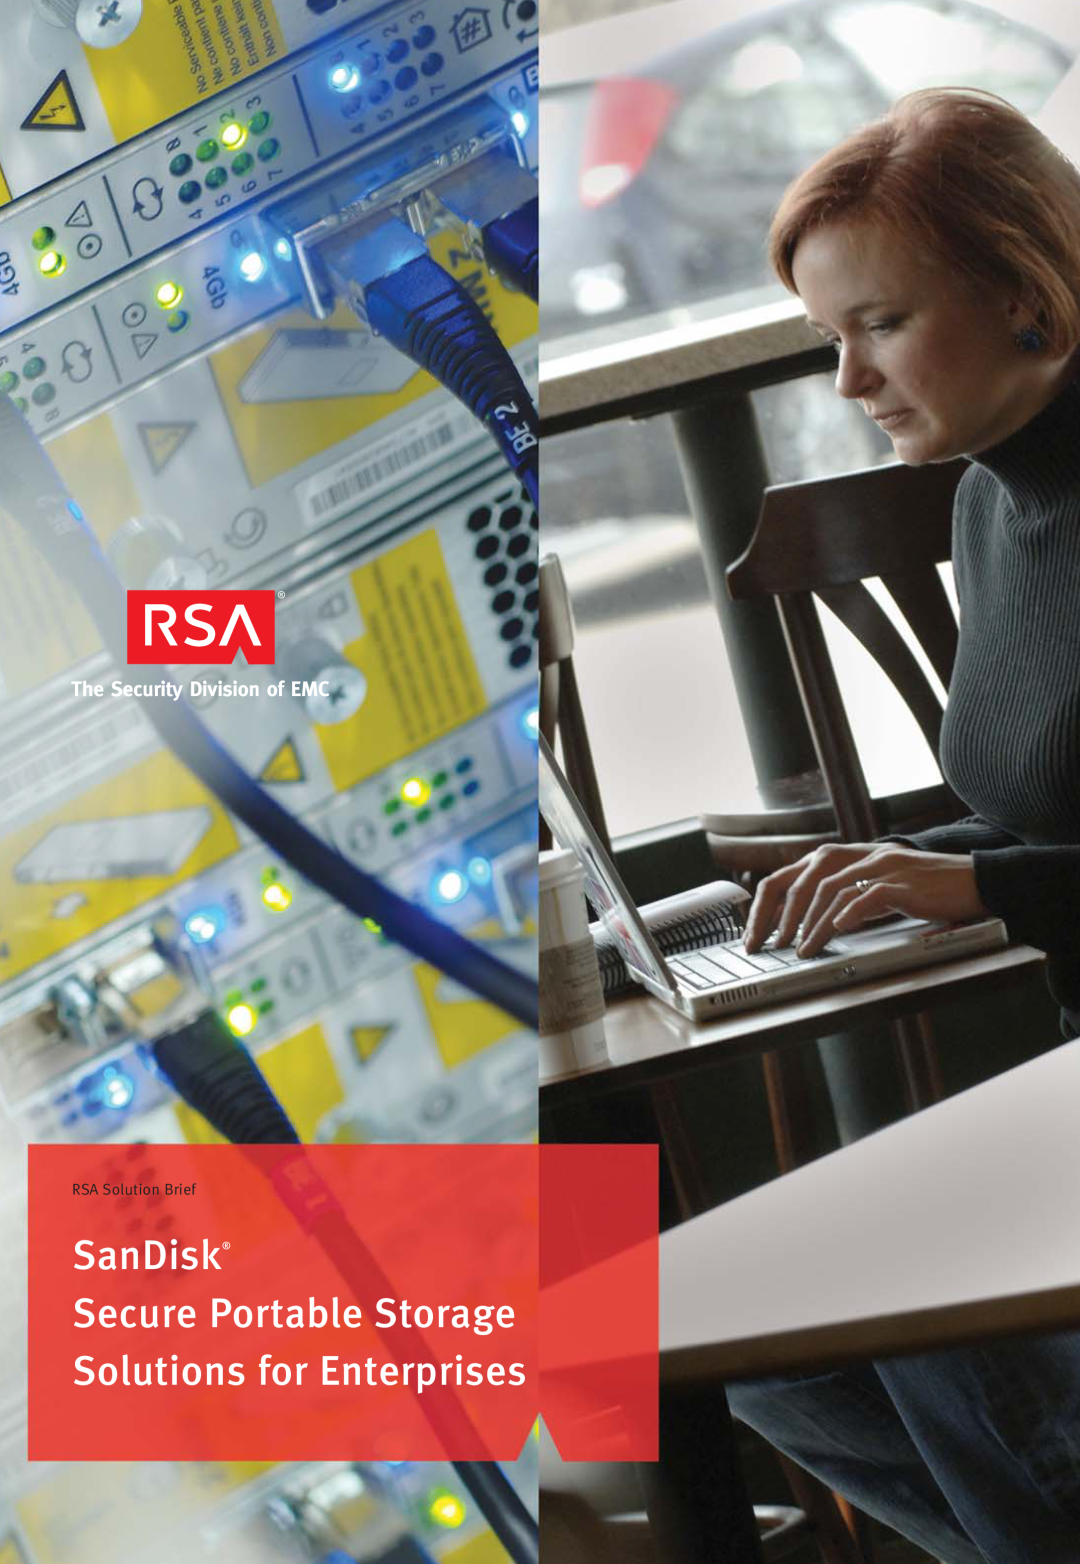 RSA Security Cruzer manual RSA Solution Brief, SanDisk, Managing the Lifecycle of, Secure Portable Storage 